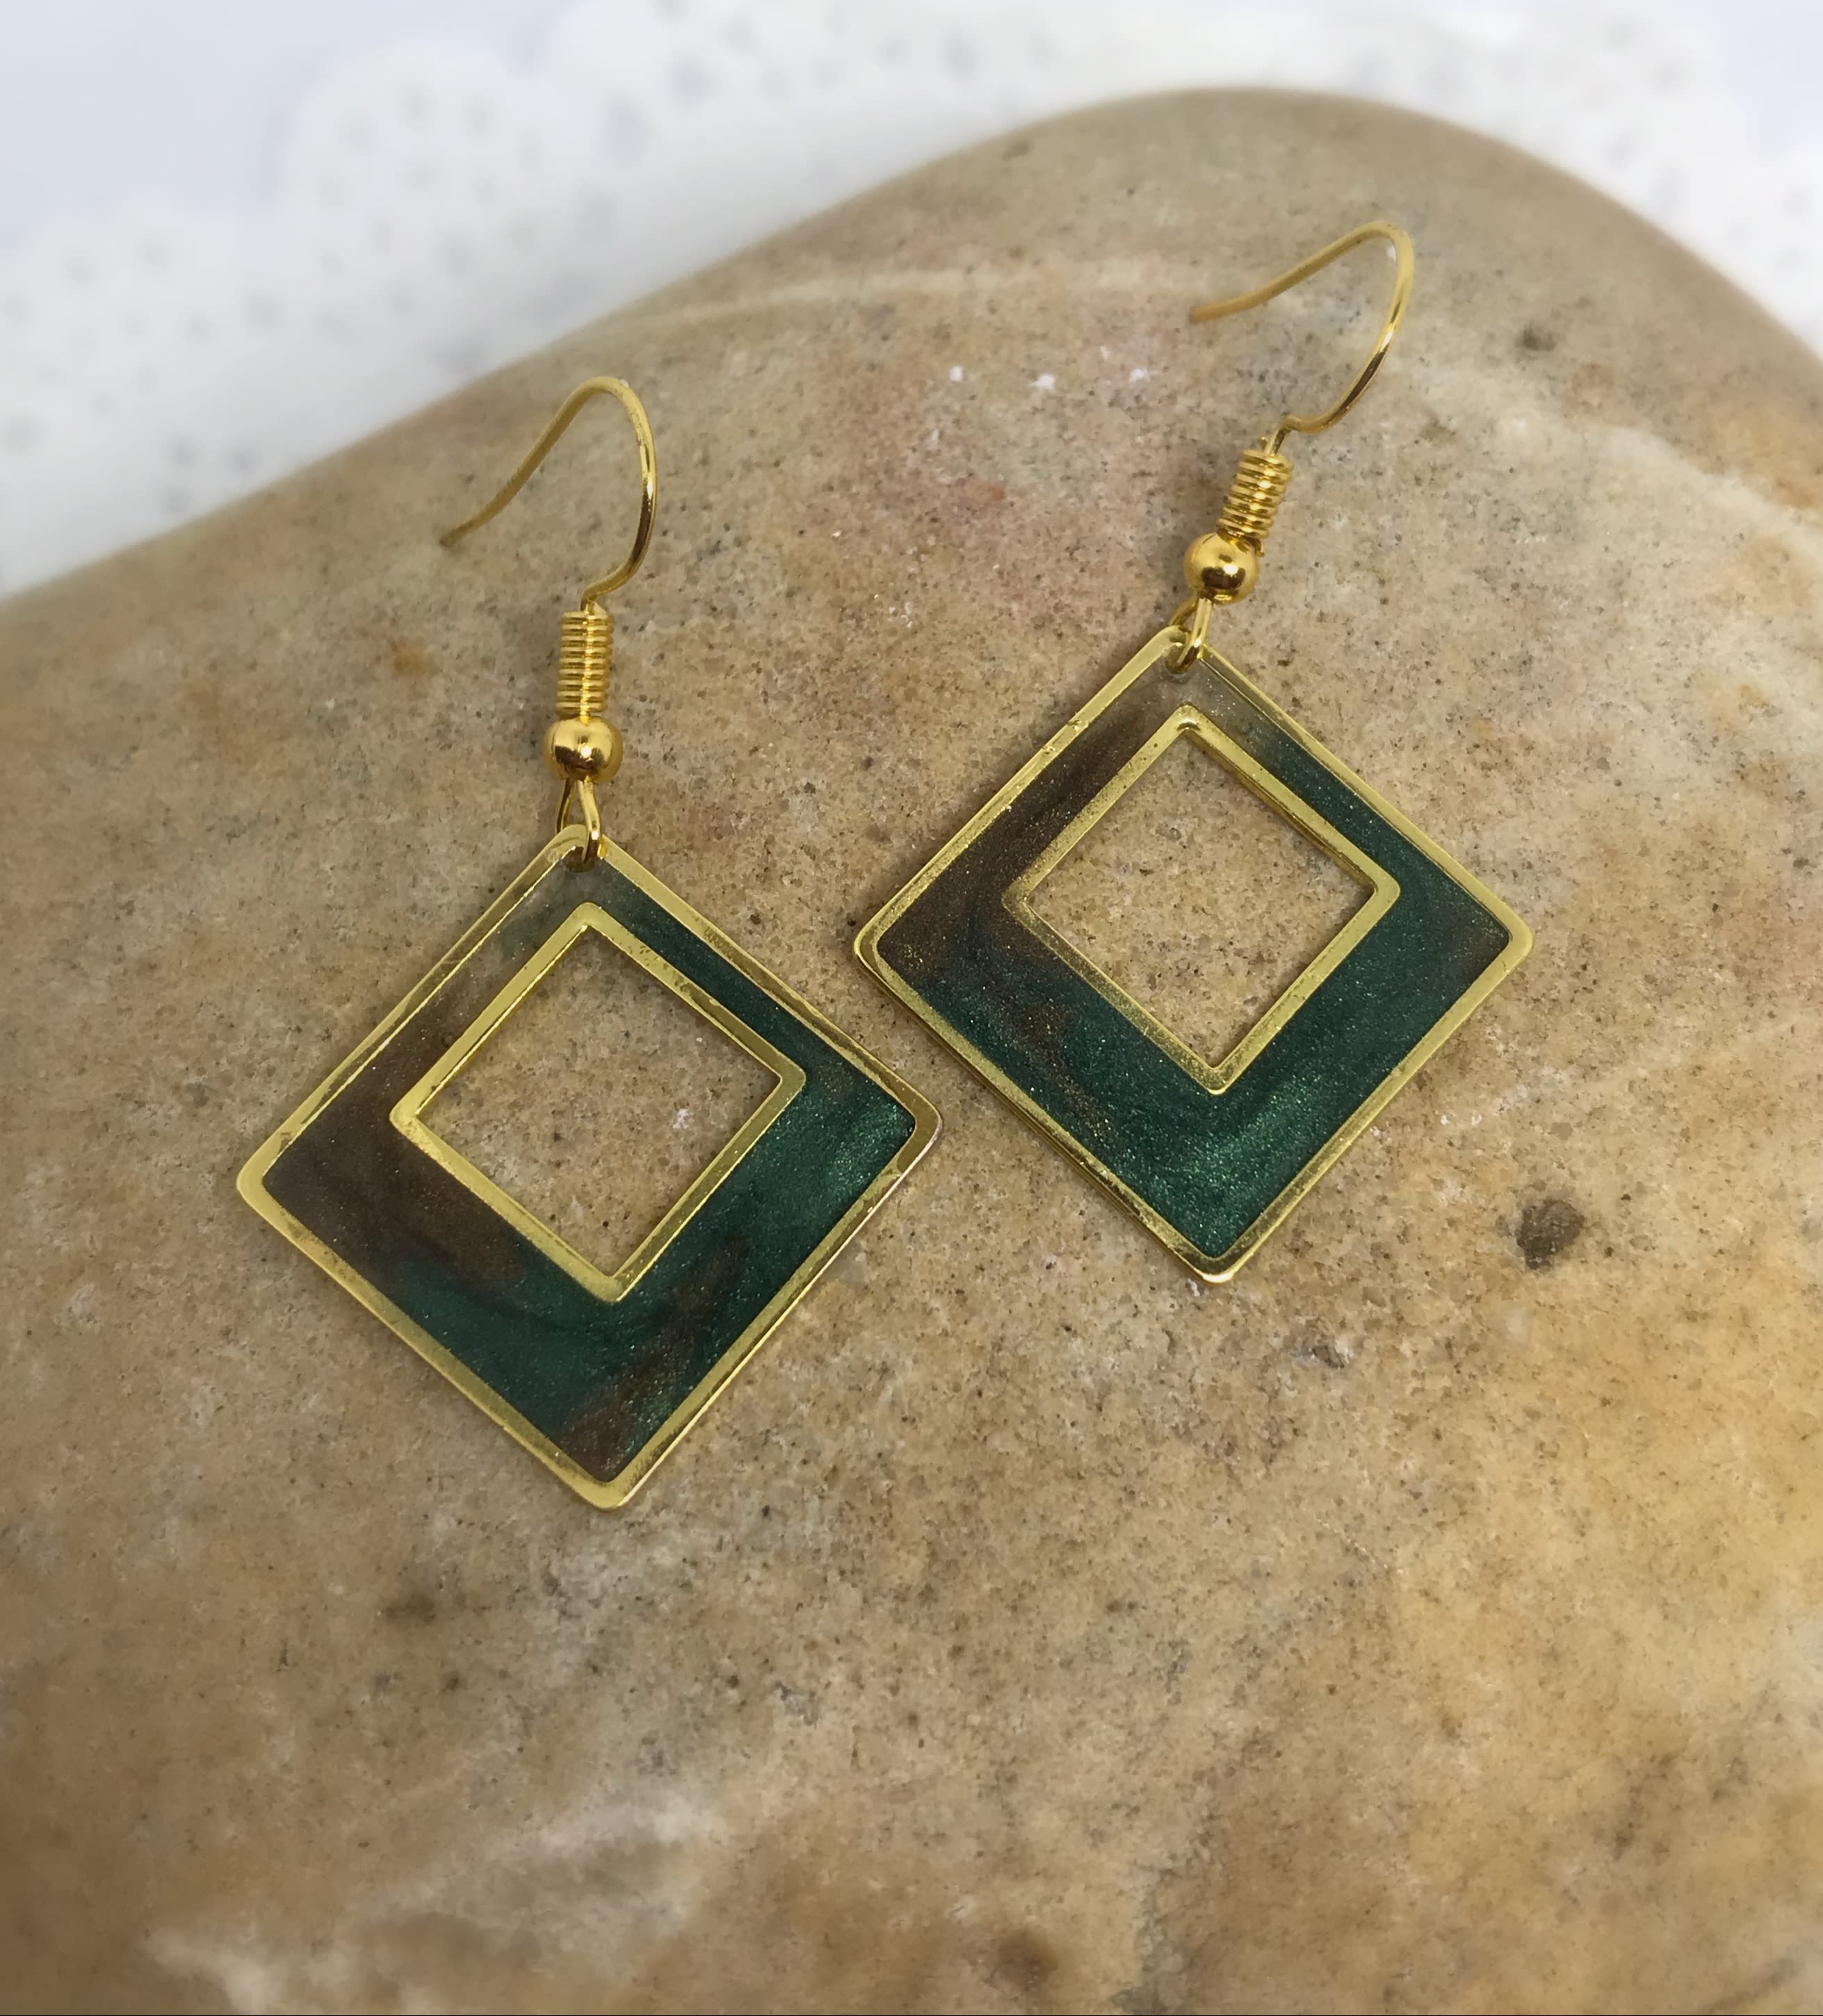 Hand Crafted, Jewelry, Green Gold Resin Earrings